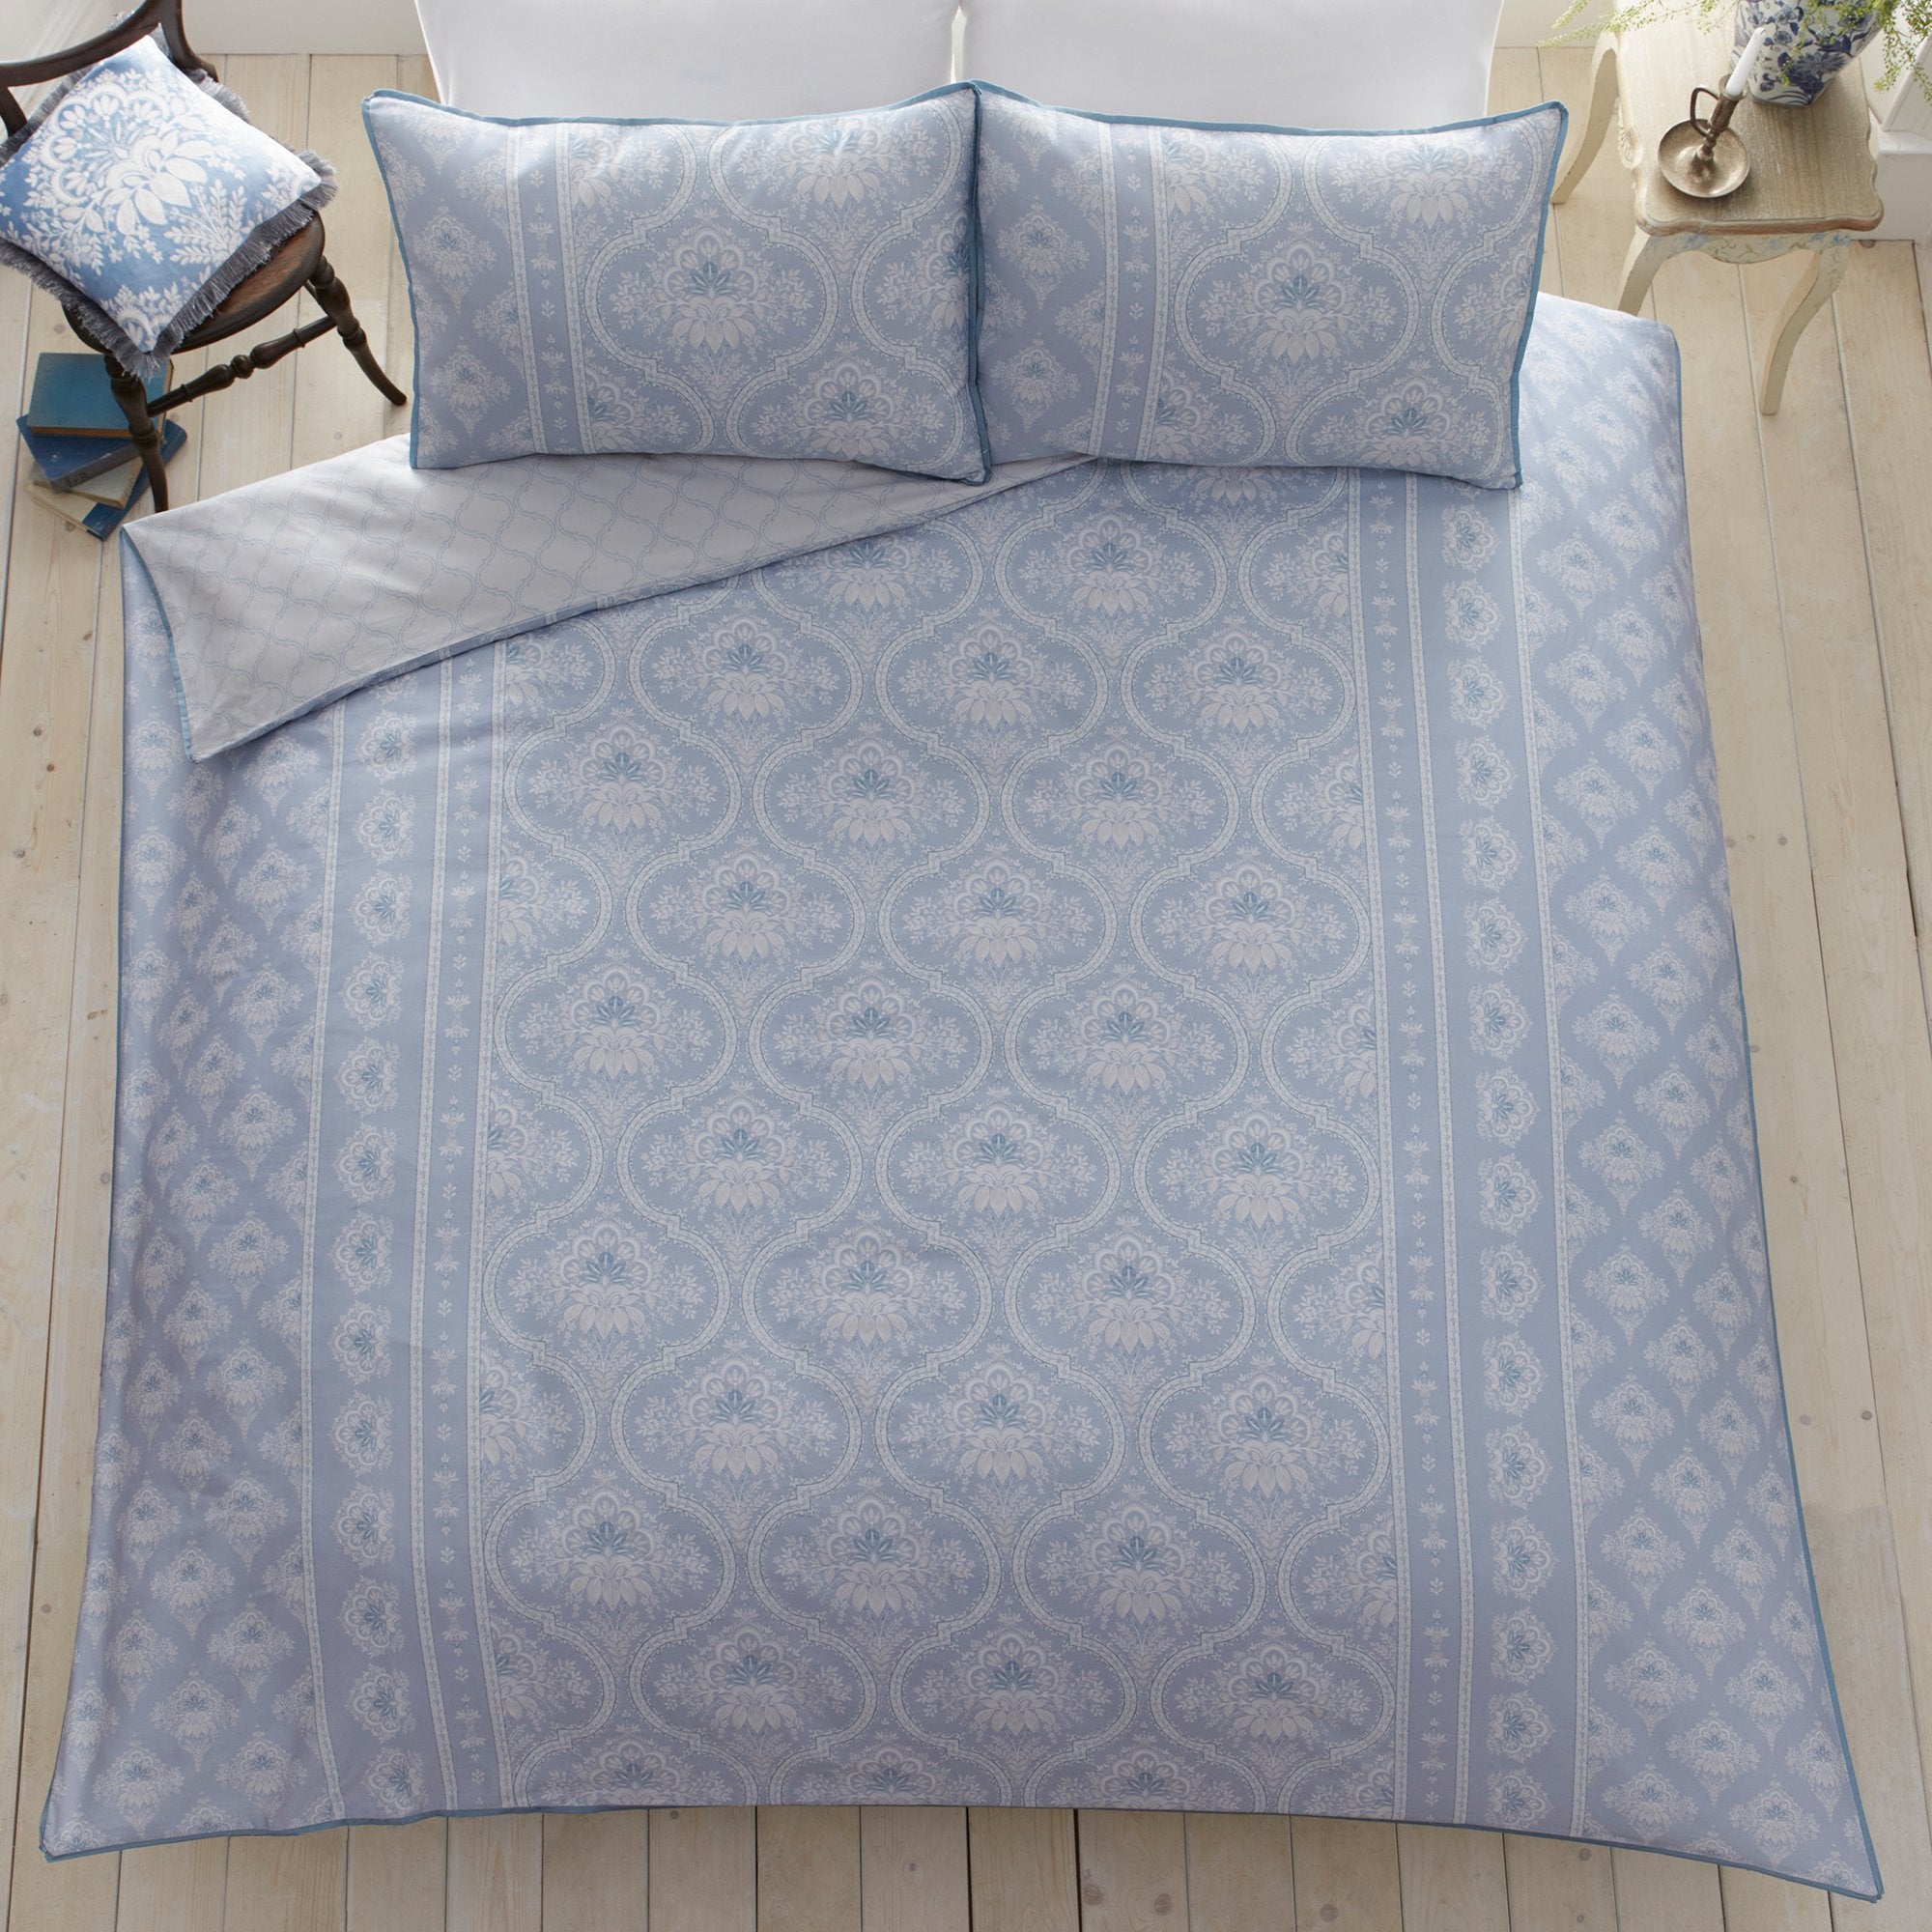 Duvet Cover Set Alexia by Appletree Heritage in Blue